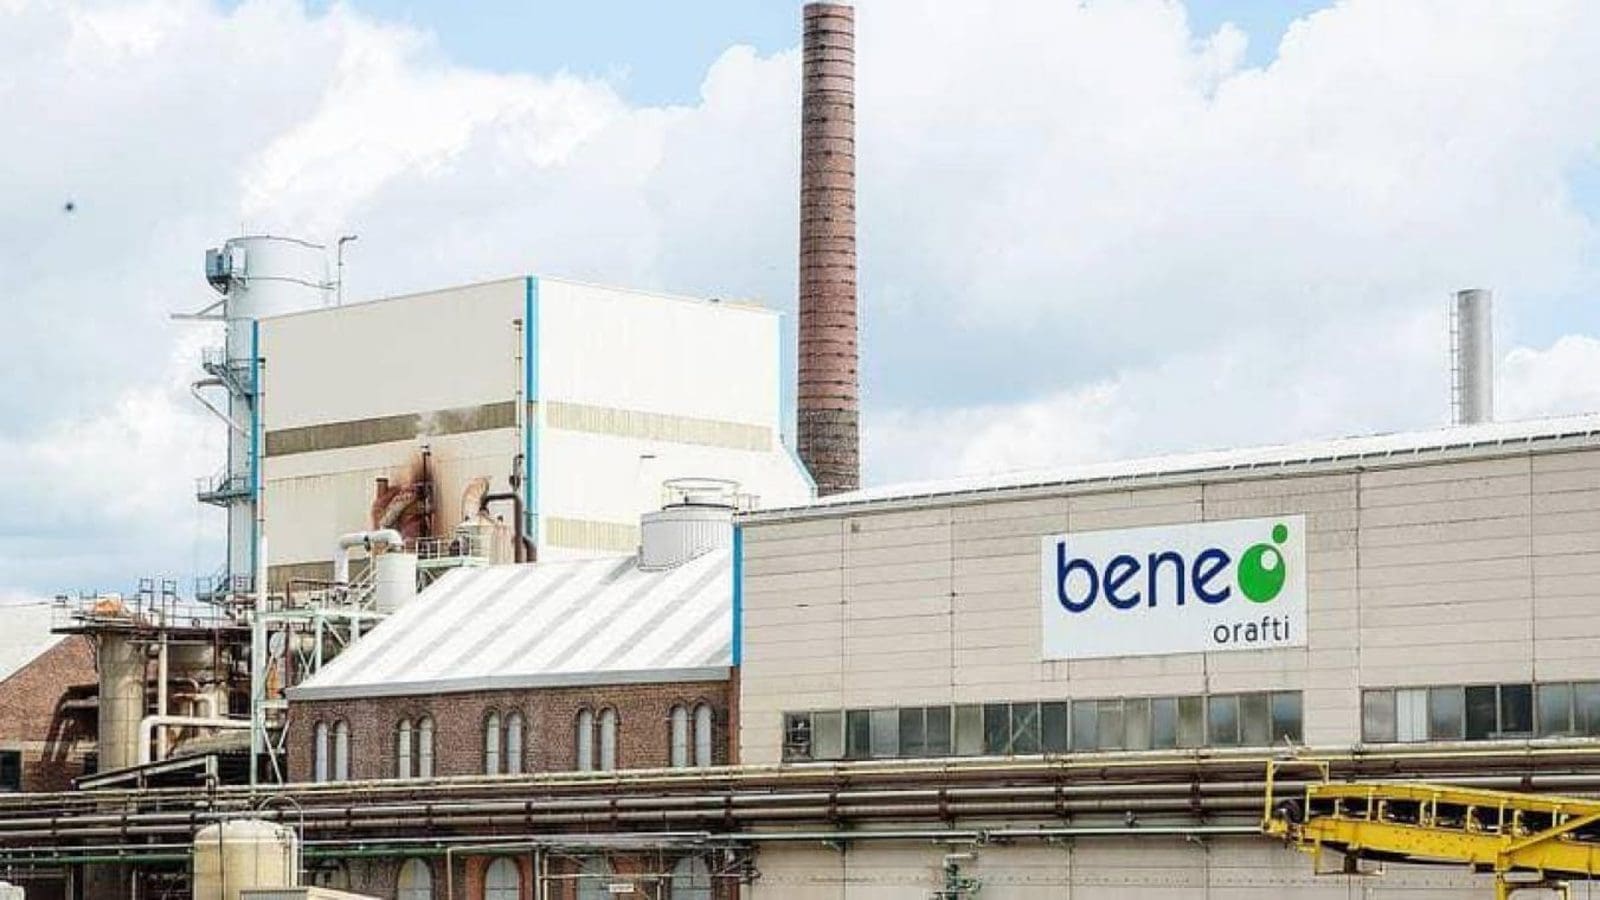 BENEO expands existing product portfolio with Dutch plant-based ingredients company Meatless acquisition